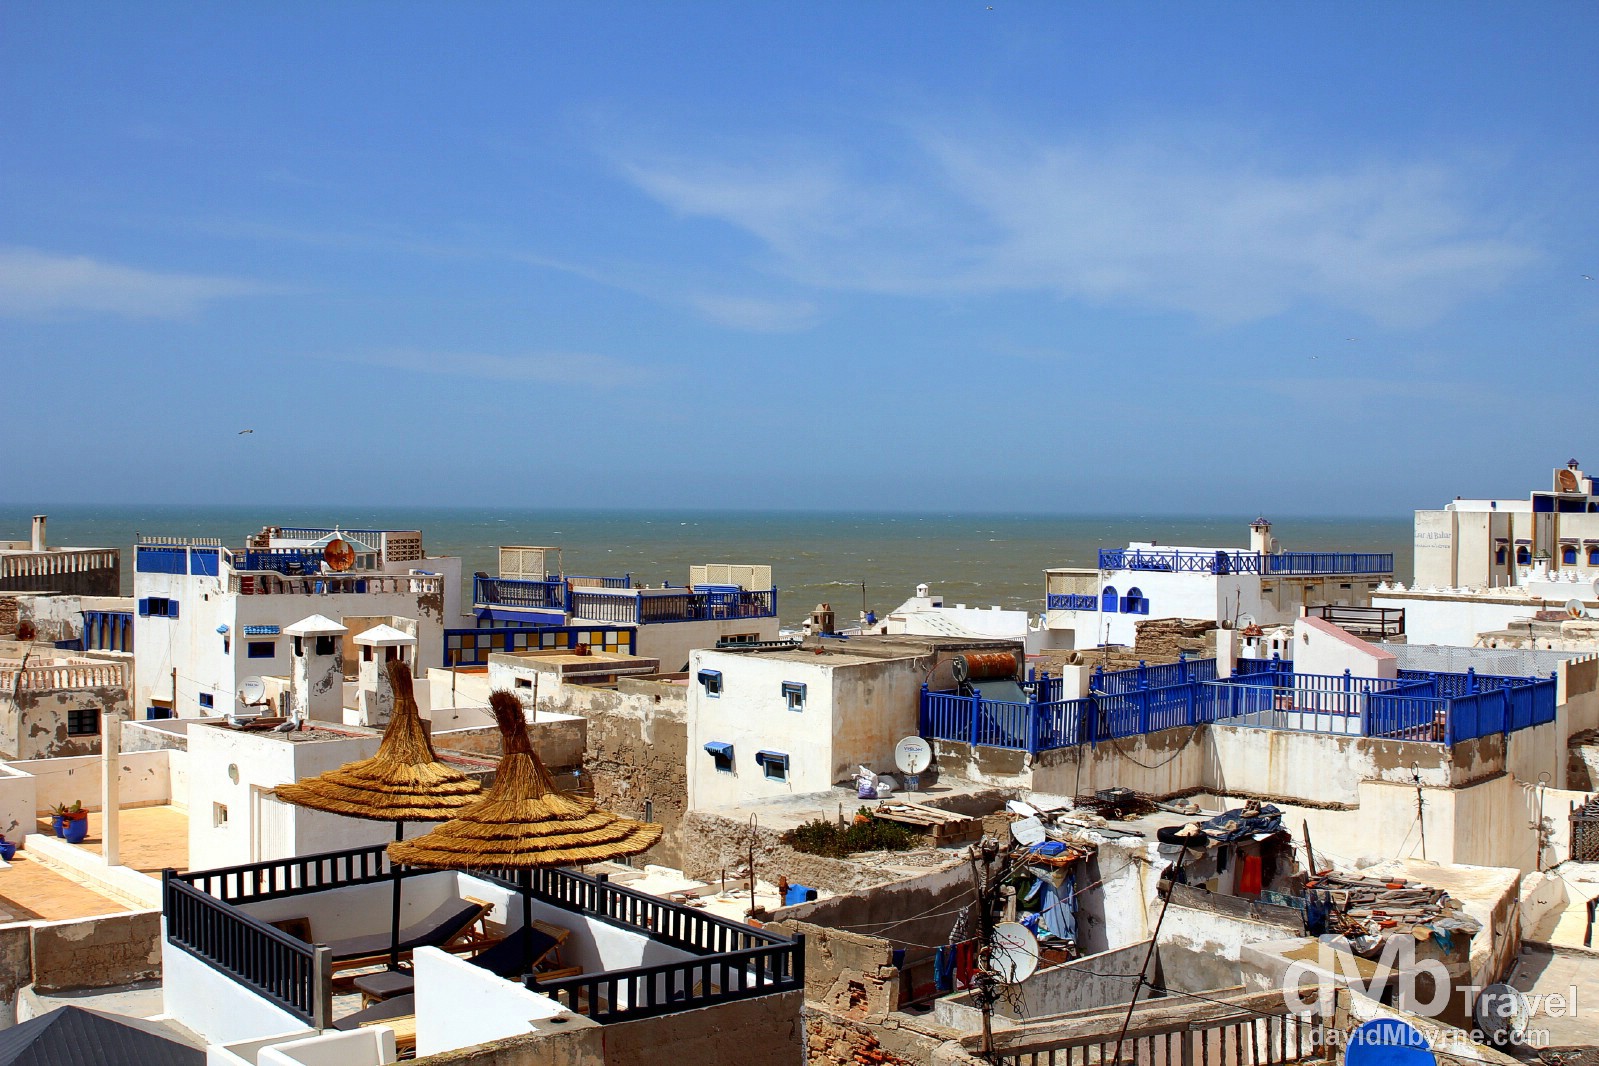 Rooftops of the median and the Atlantic Ocean as seen from the terrace of Raid El Pacha, Essaouira, Morocco. May 2nd, 2014.